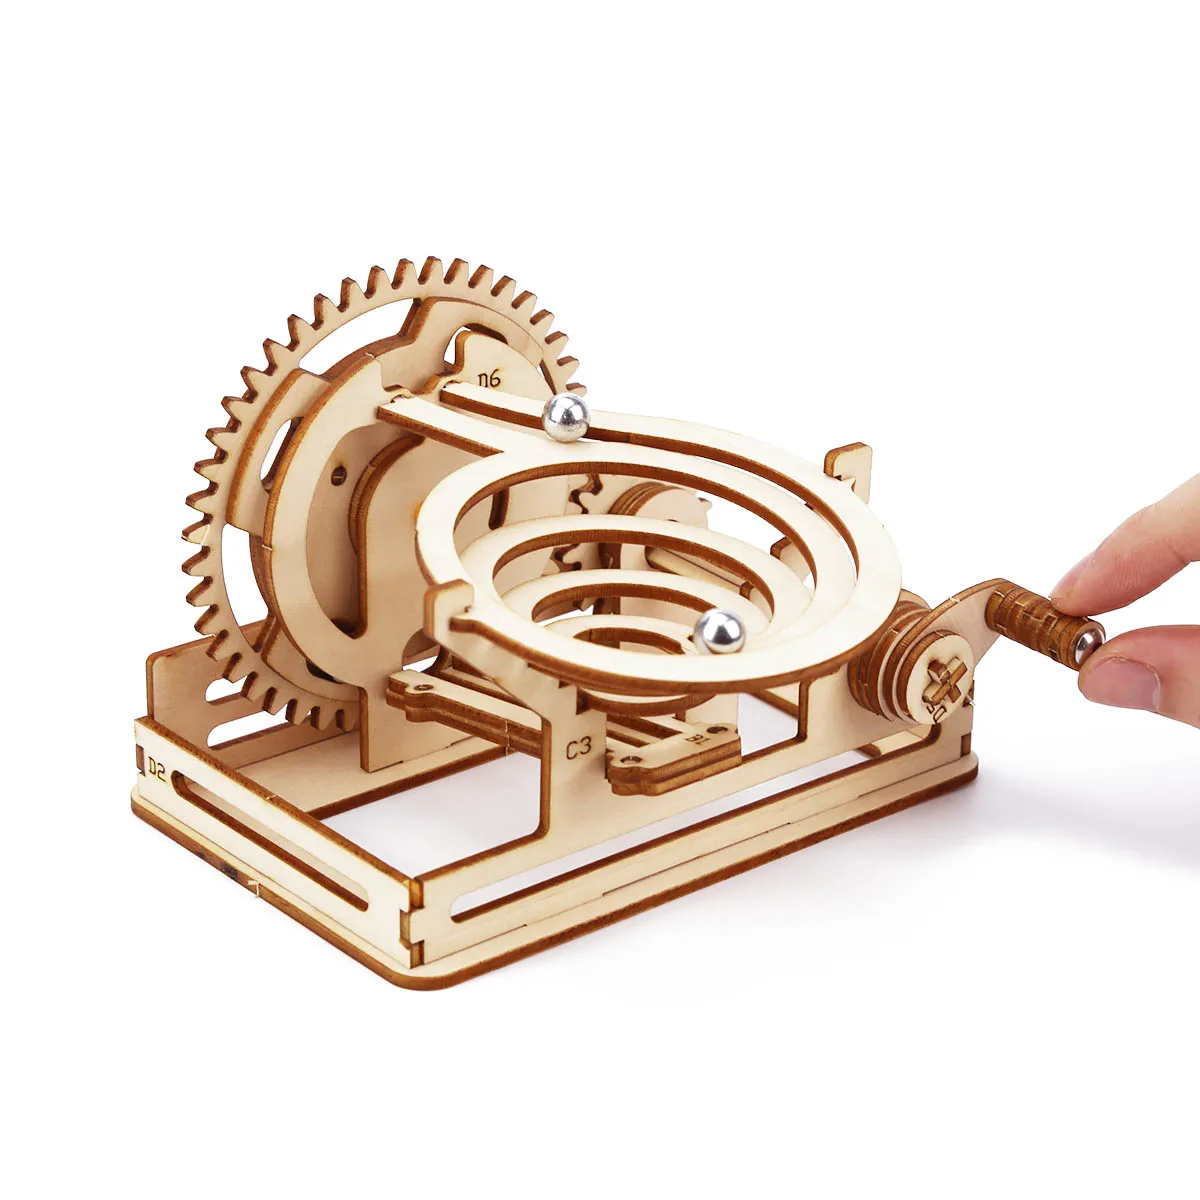 Inds marble race run 3d wooden puzzle mechanical kit stem science physics toy maze ball thumb200